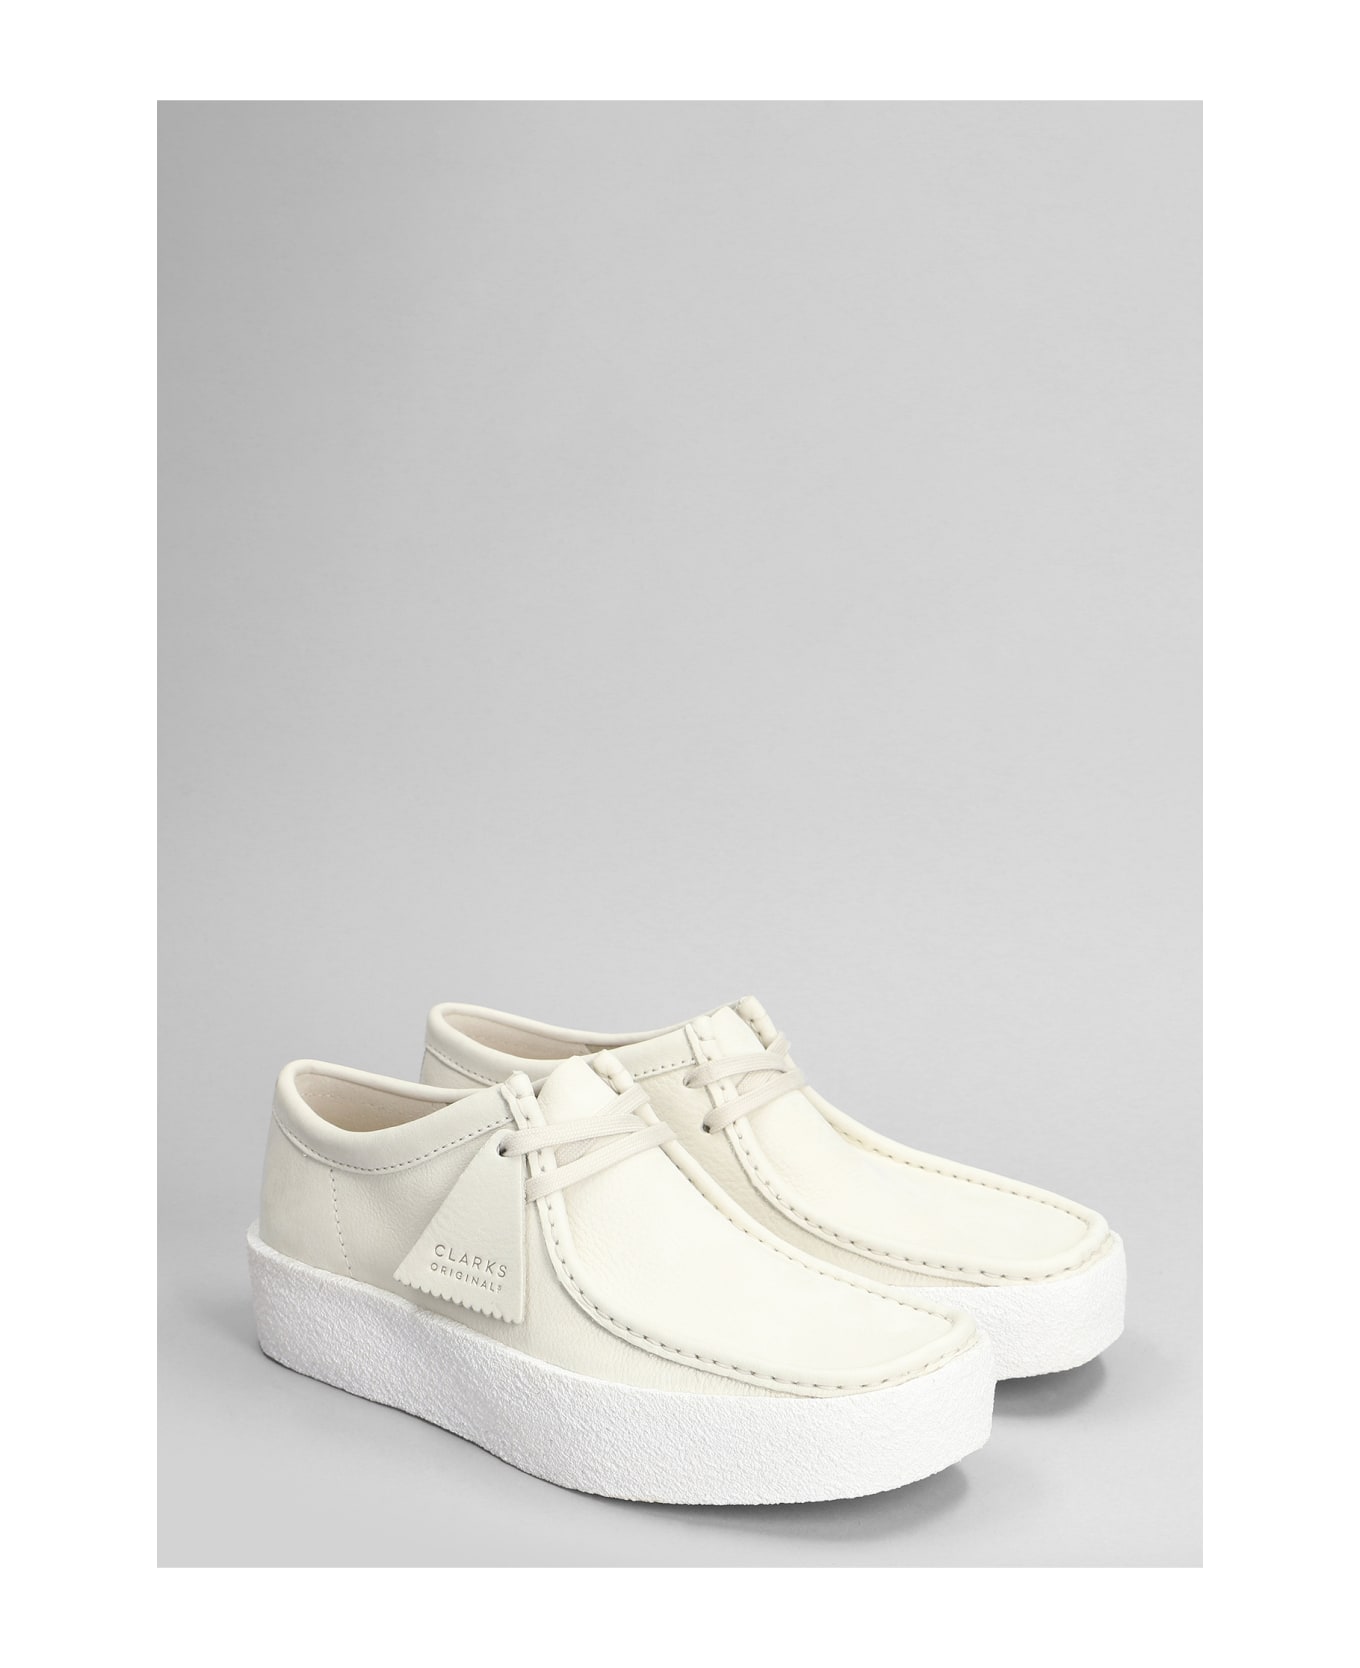 Clarks Wallabee Cup Lace Up Shoes In White Nubuck - white レースアップシューズ